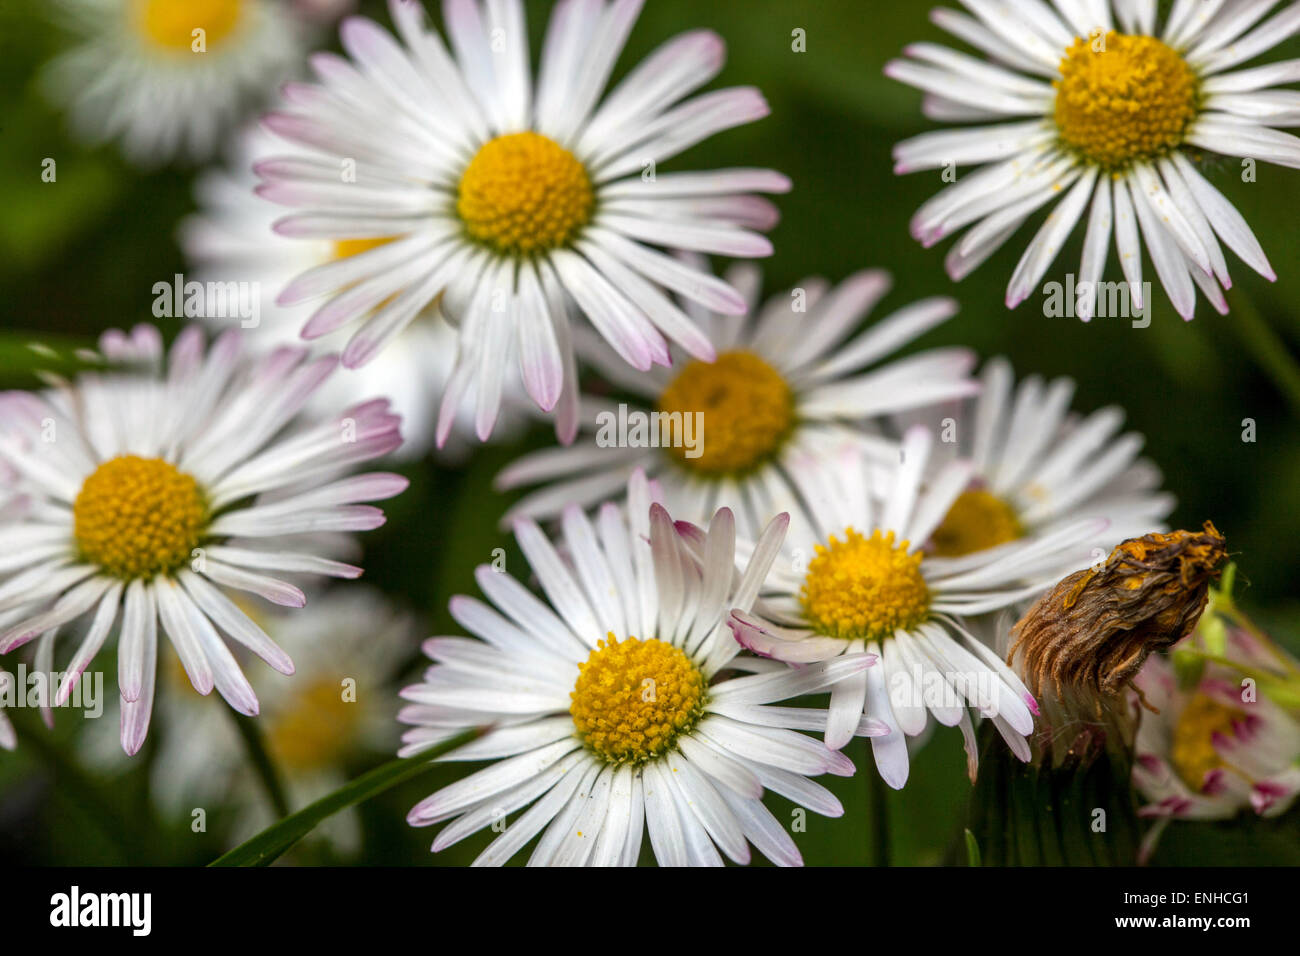 Common Daisies, Bellis perennis close up flowers in garden lawn Stock Photo